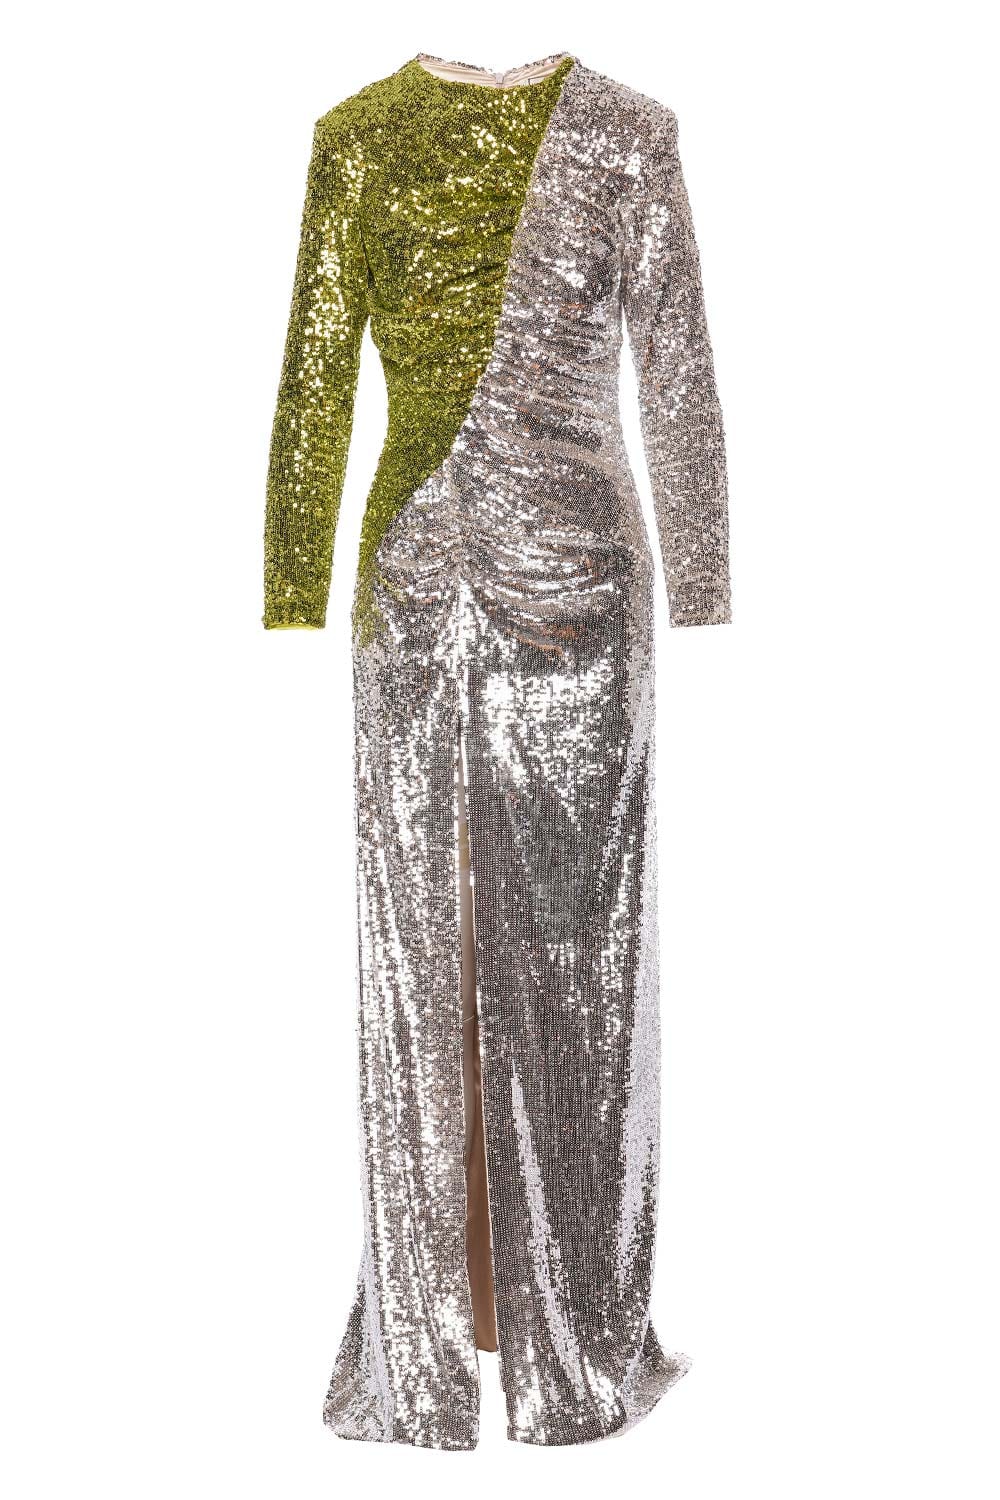 The New Arrivals by Ilkyaz Ozel Iman Lime Fusion Sequined Maxi Dress